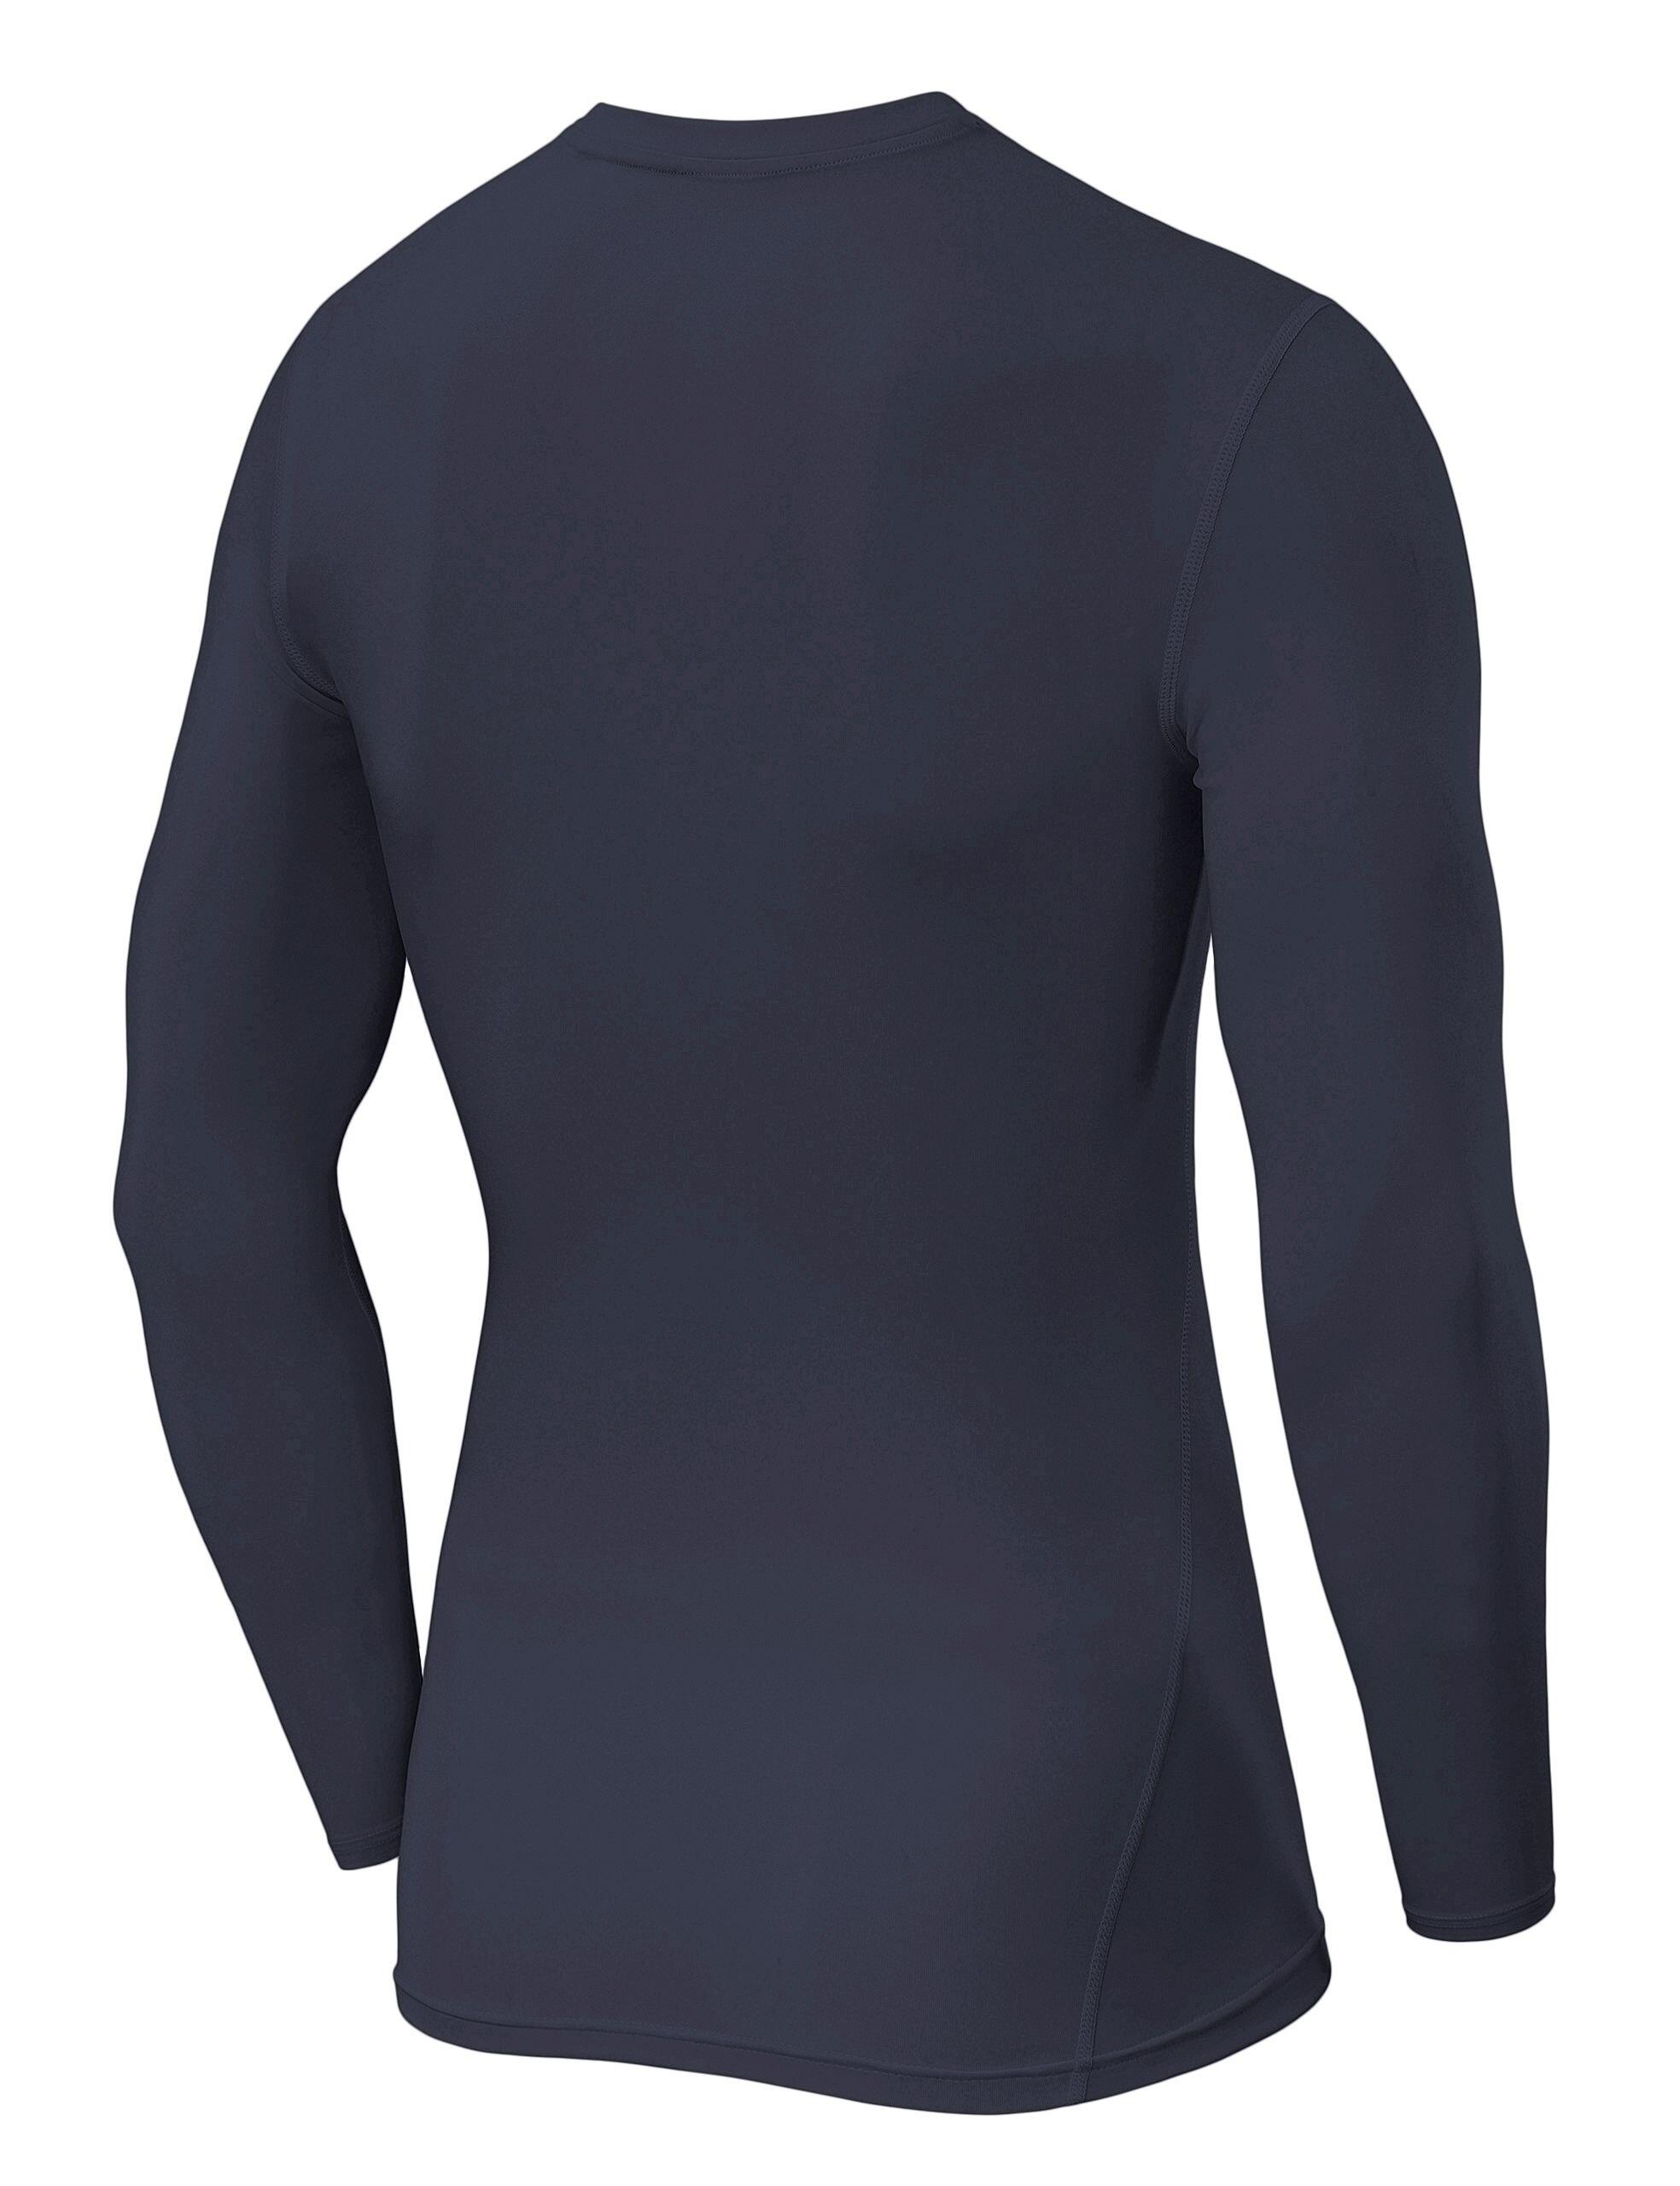 Men's Power Base Layer Compression Long Sleeve Top - Graphite 3/5